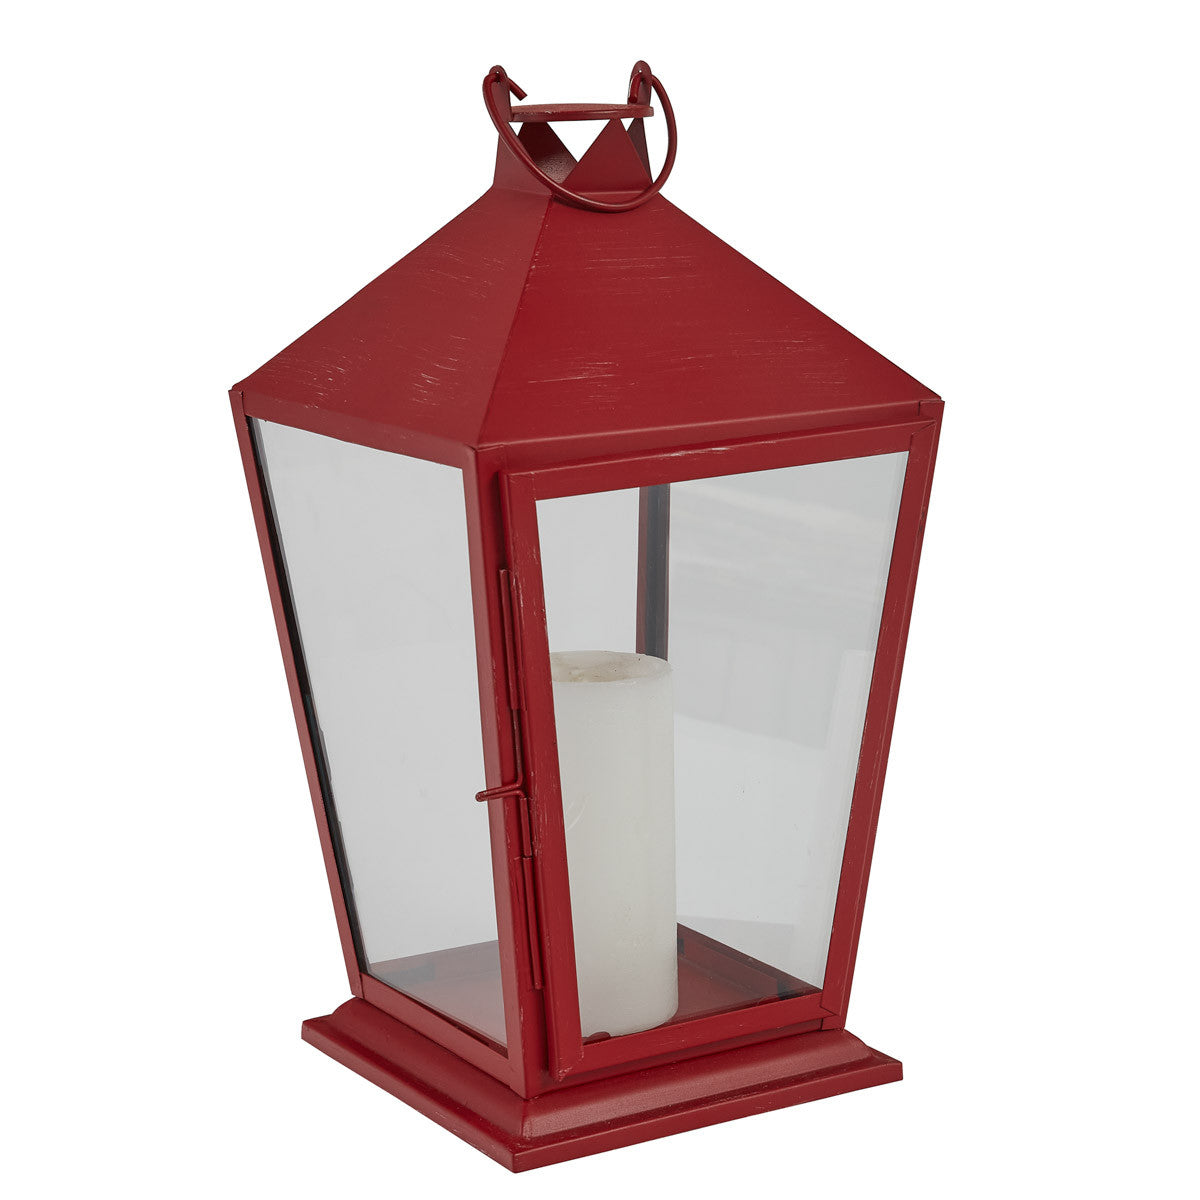 Tall Square Red Lantern With Glass - Park Designs